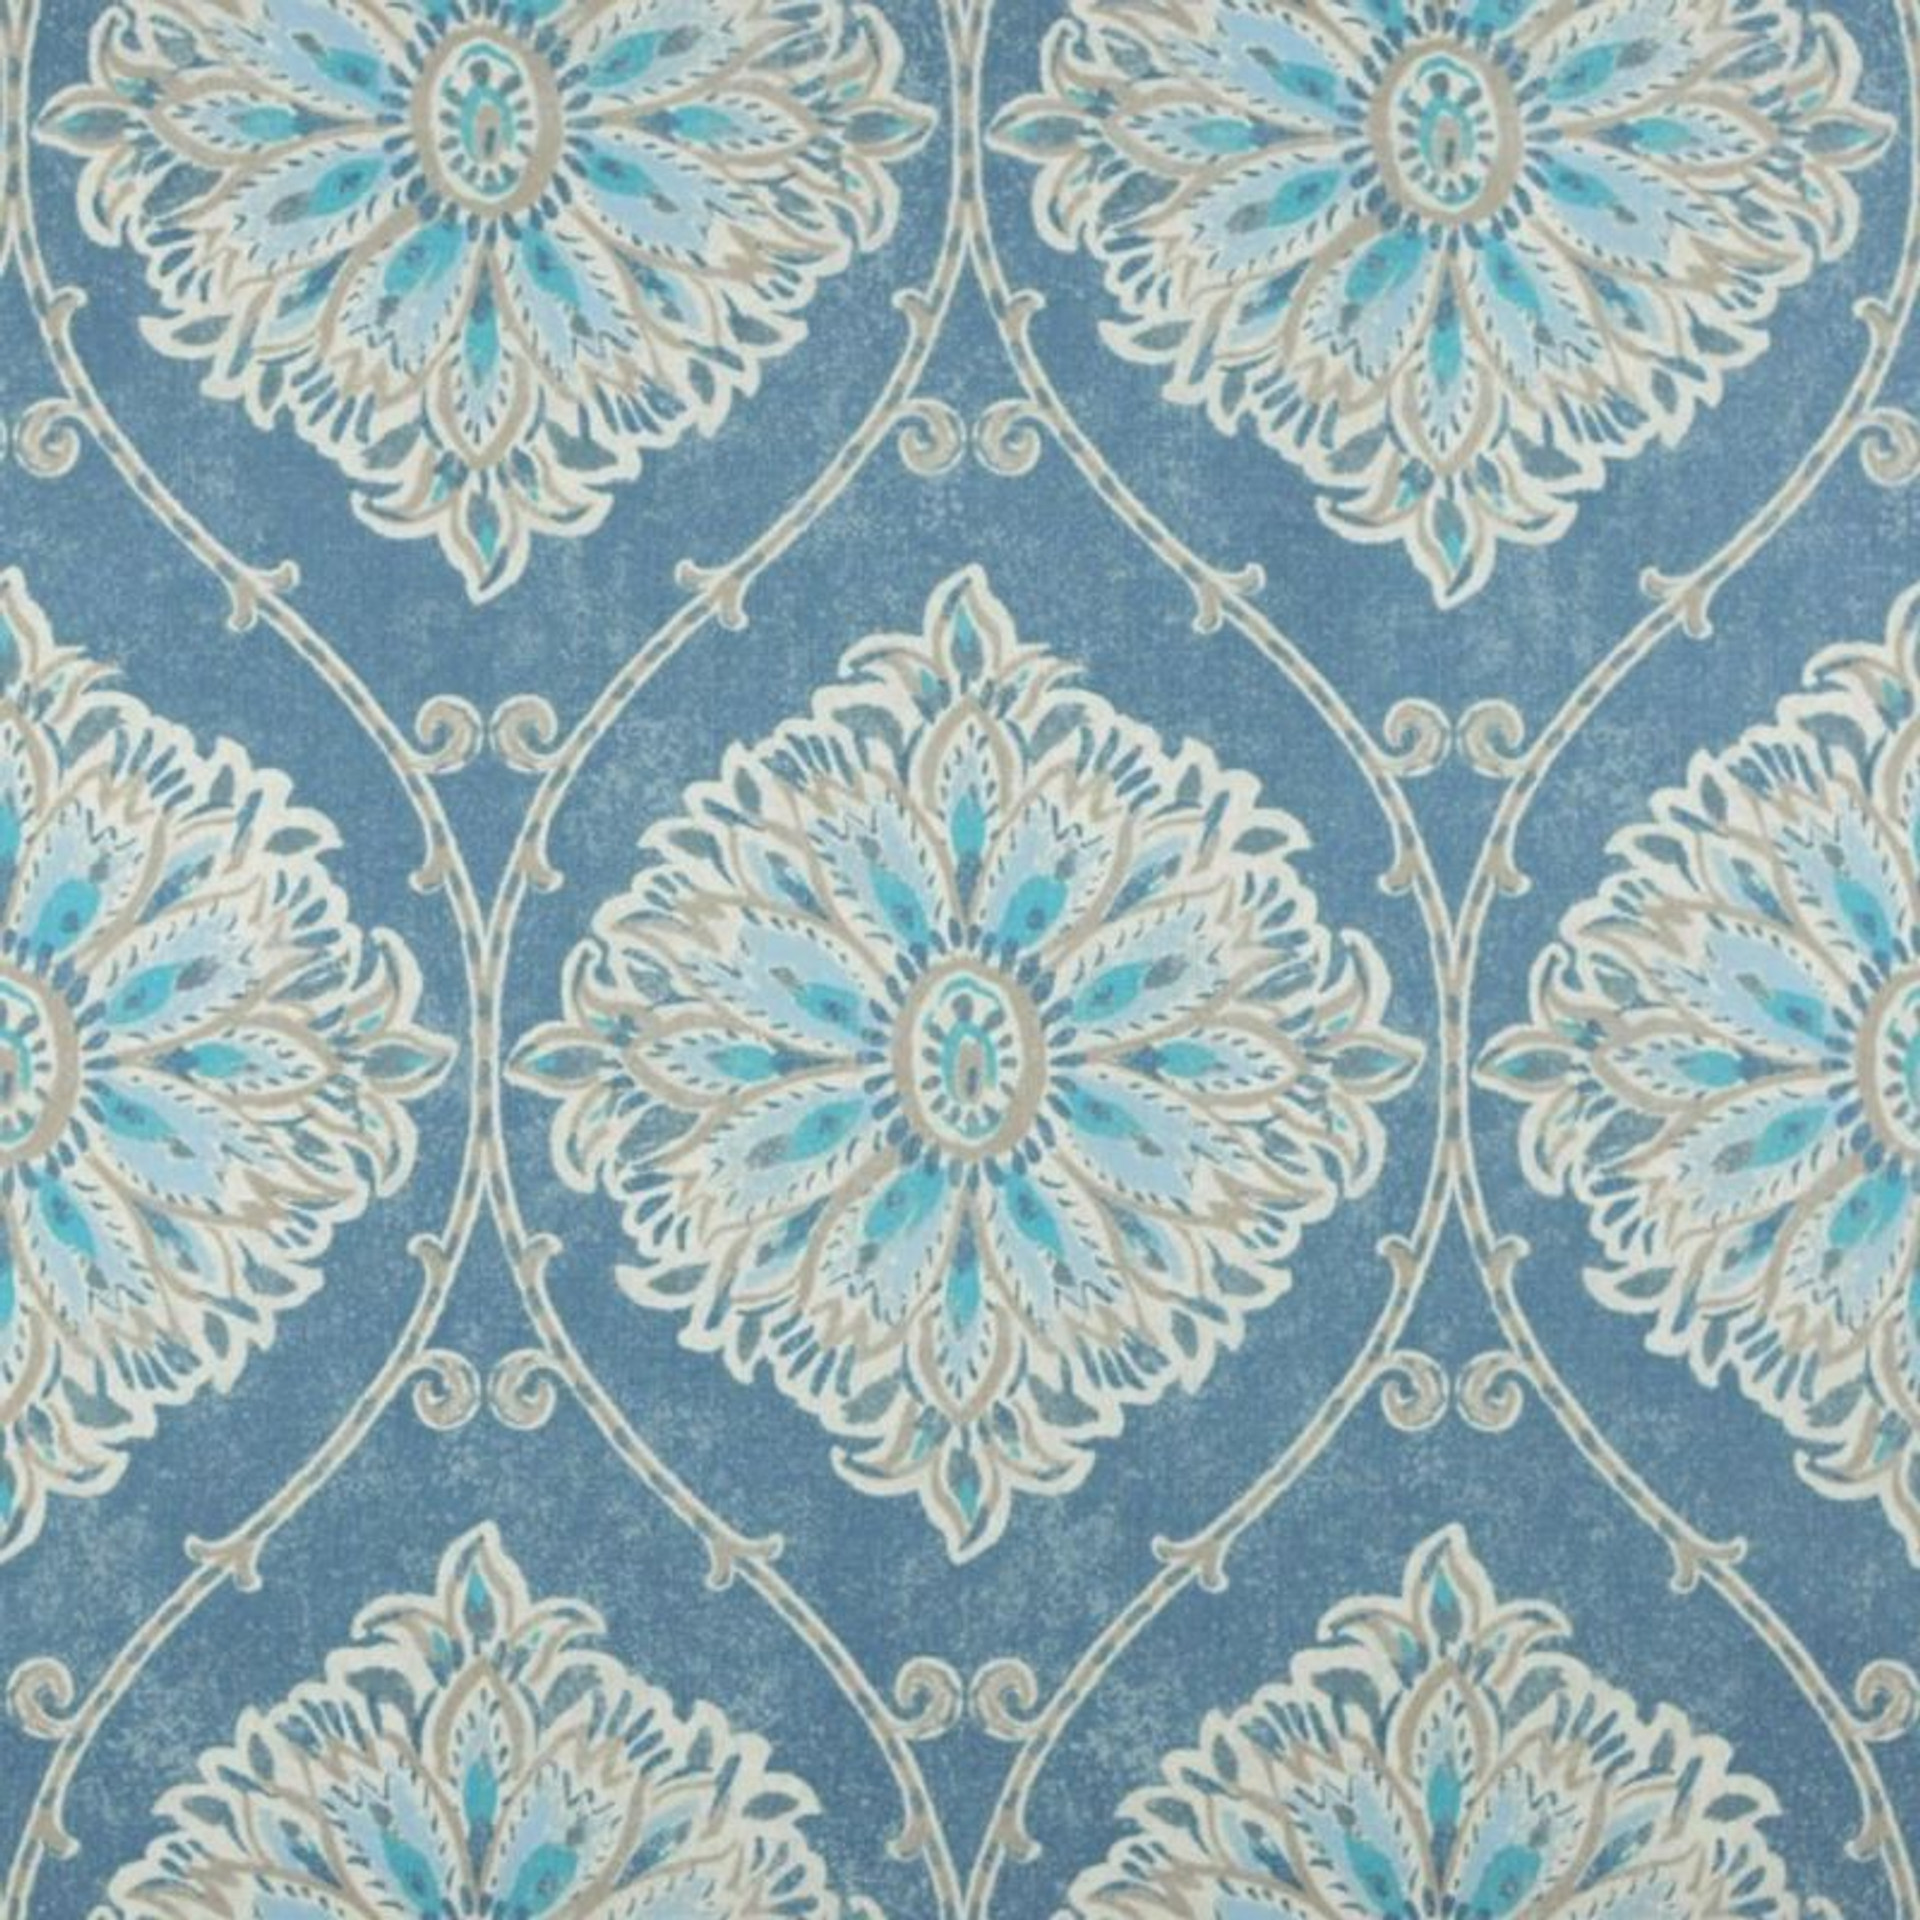 Magnolia Home Fashions LEVERETT DENIM Floral Print Upholstery And ...